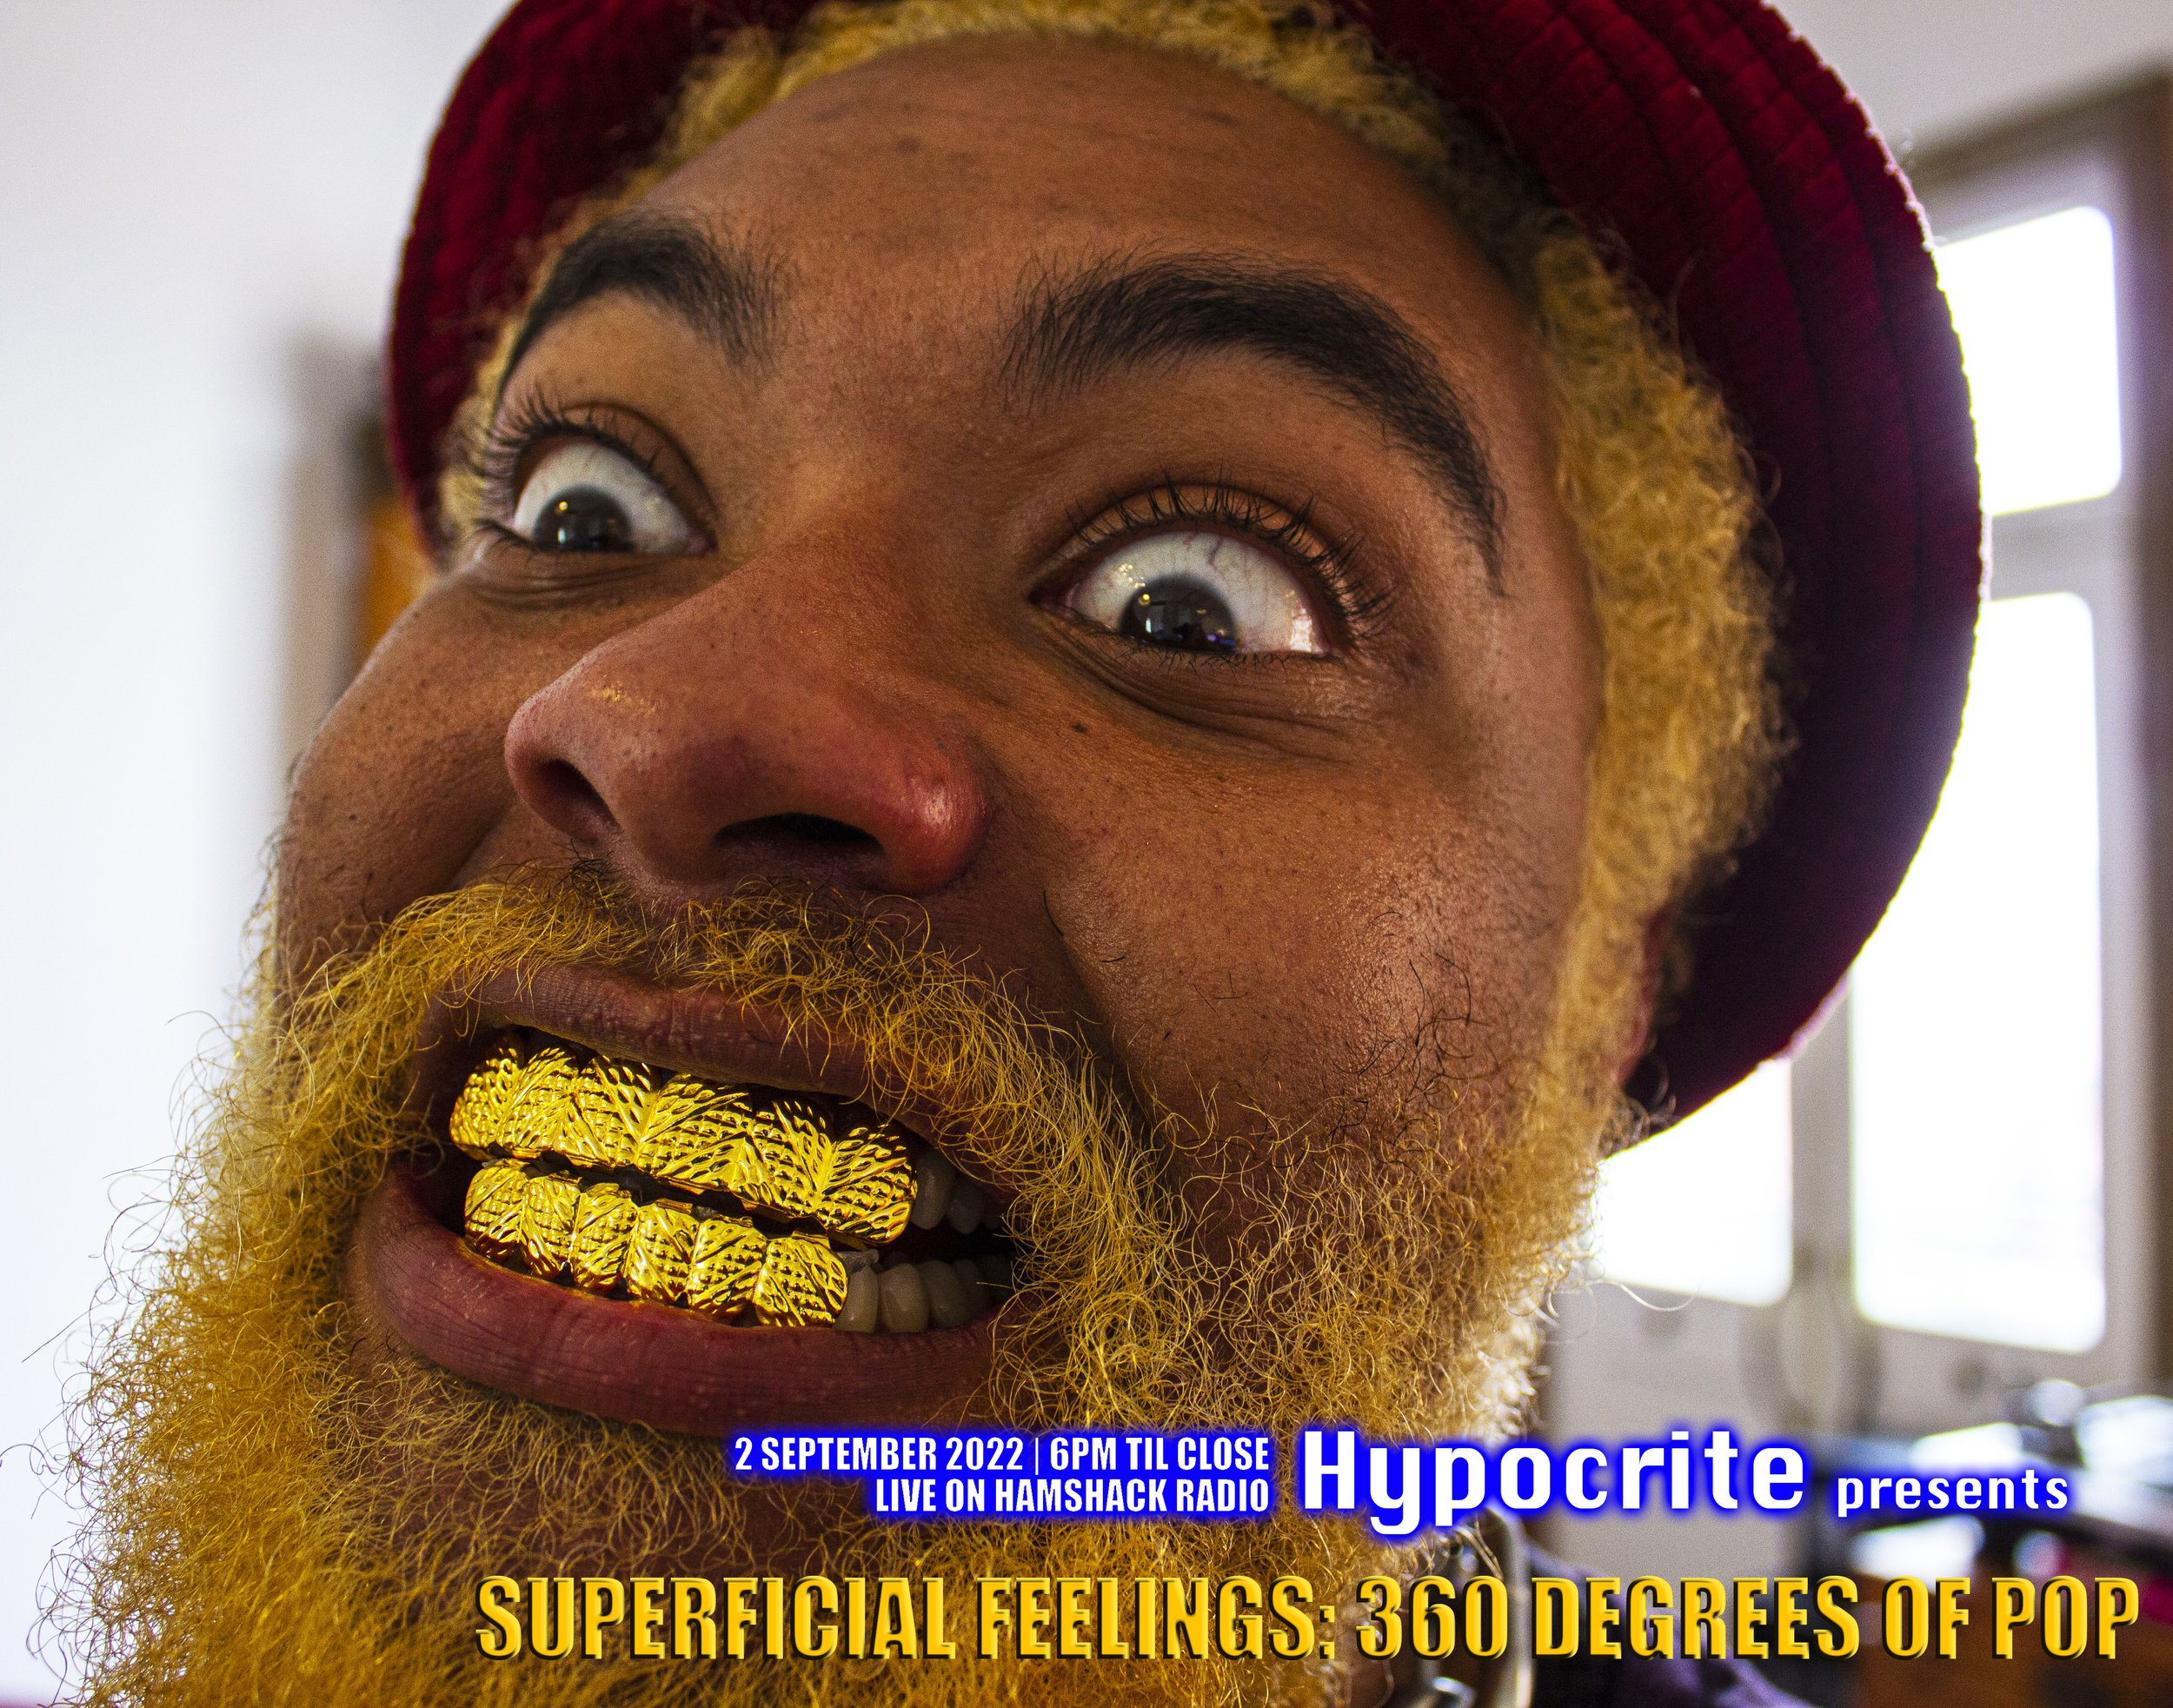 Figure 5 - Flyer for Hypocrite's 'Superficial Feelings - 360 Degrees of Pop'